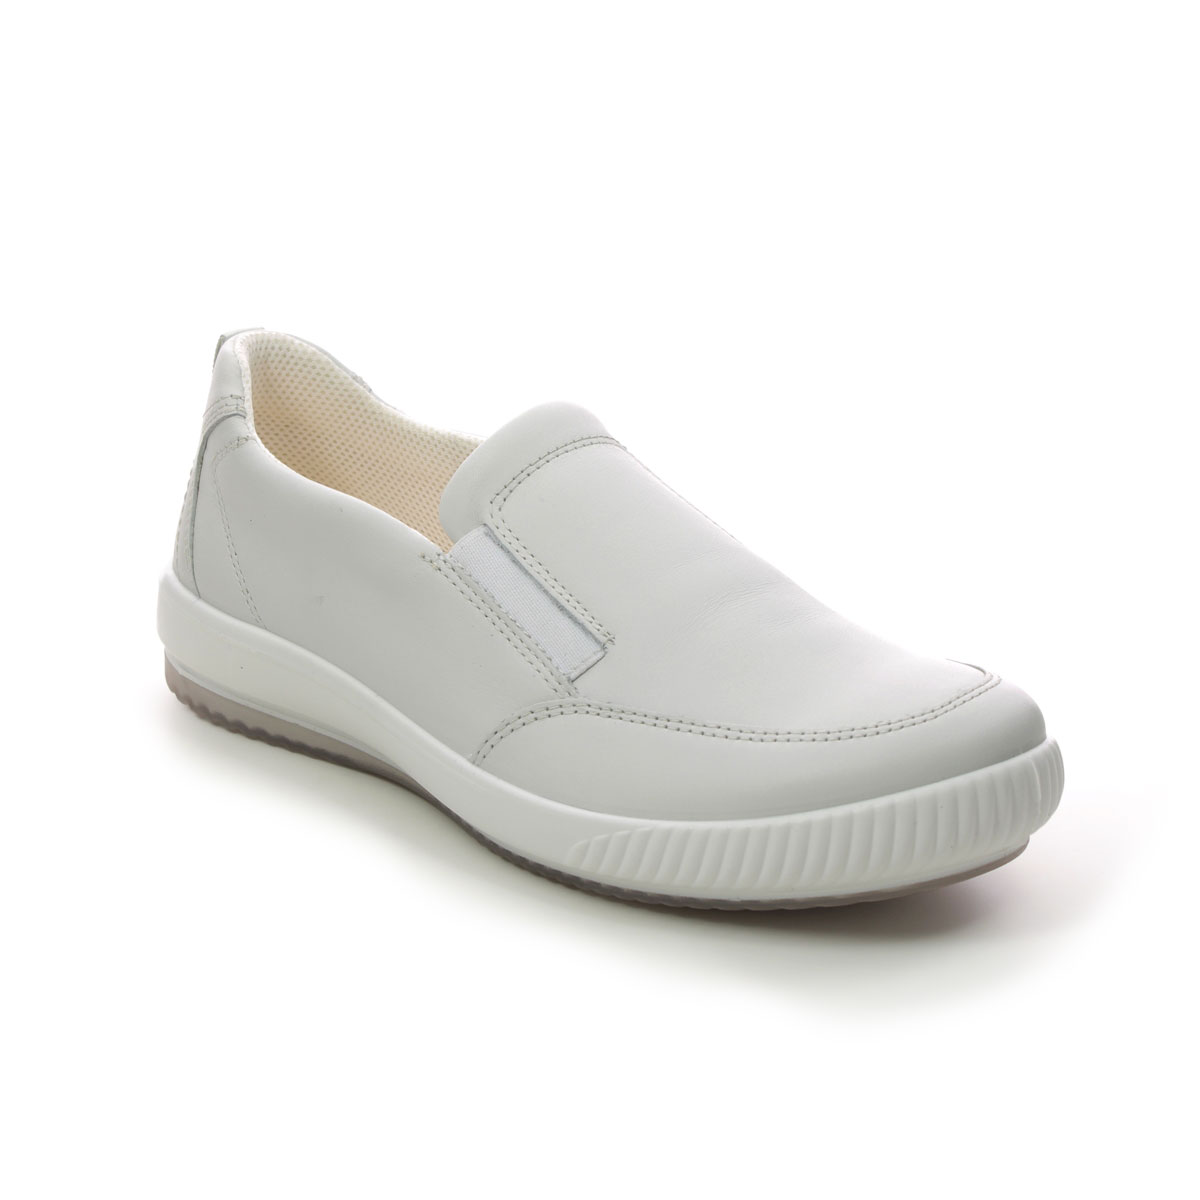 Legero Tanaro 5 Slip White Leather Womens Comfort Slip On Shoes 2000215-1000 In Size 7 In Plain White Leather